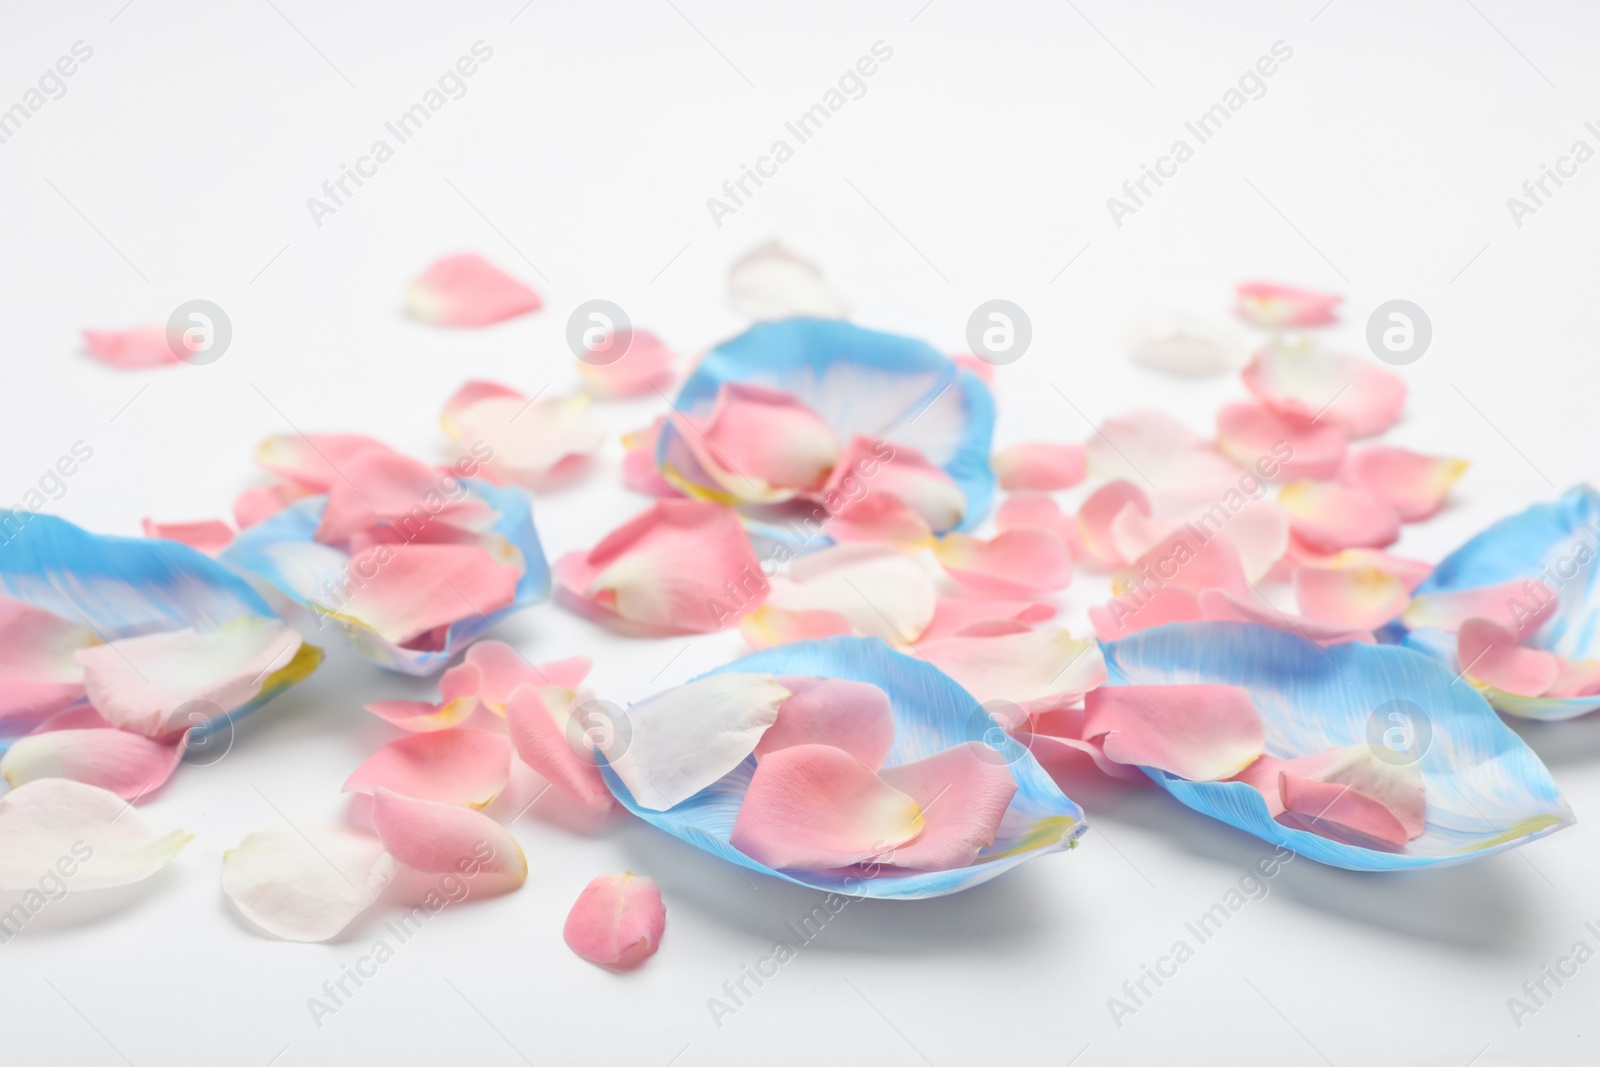 Photo of Pile of beautiful petals on white background